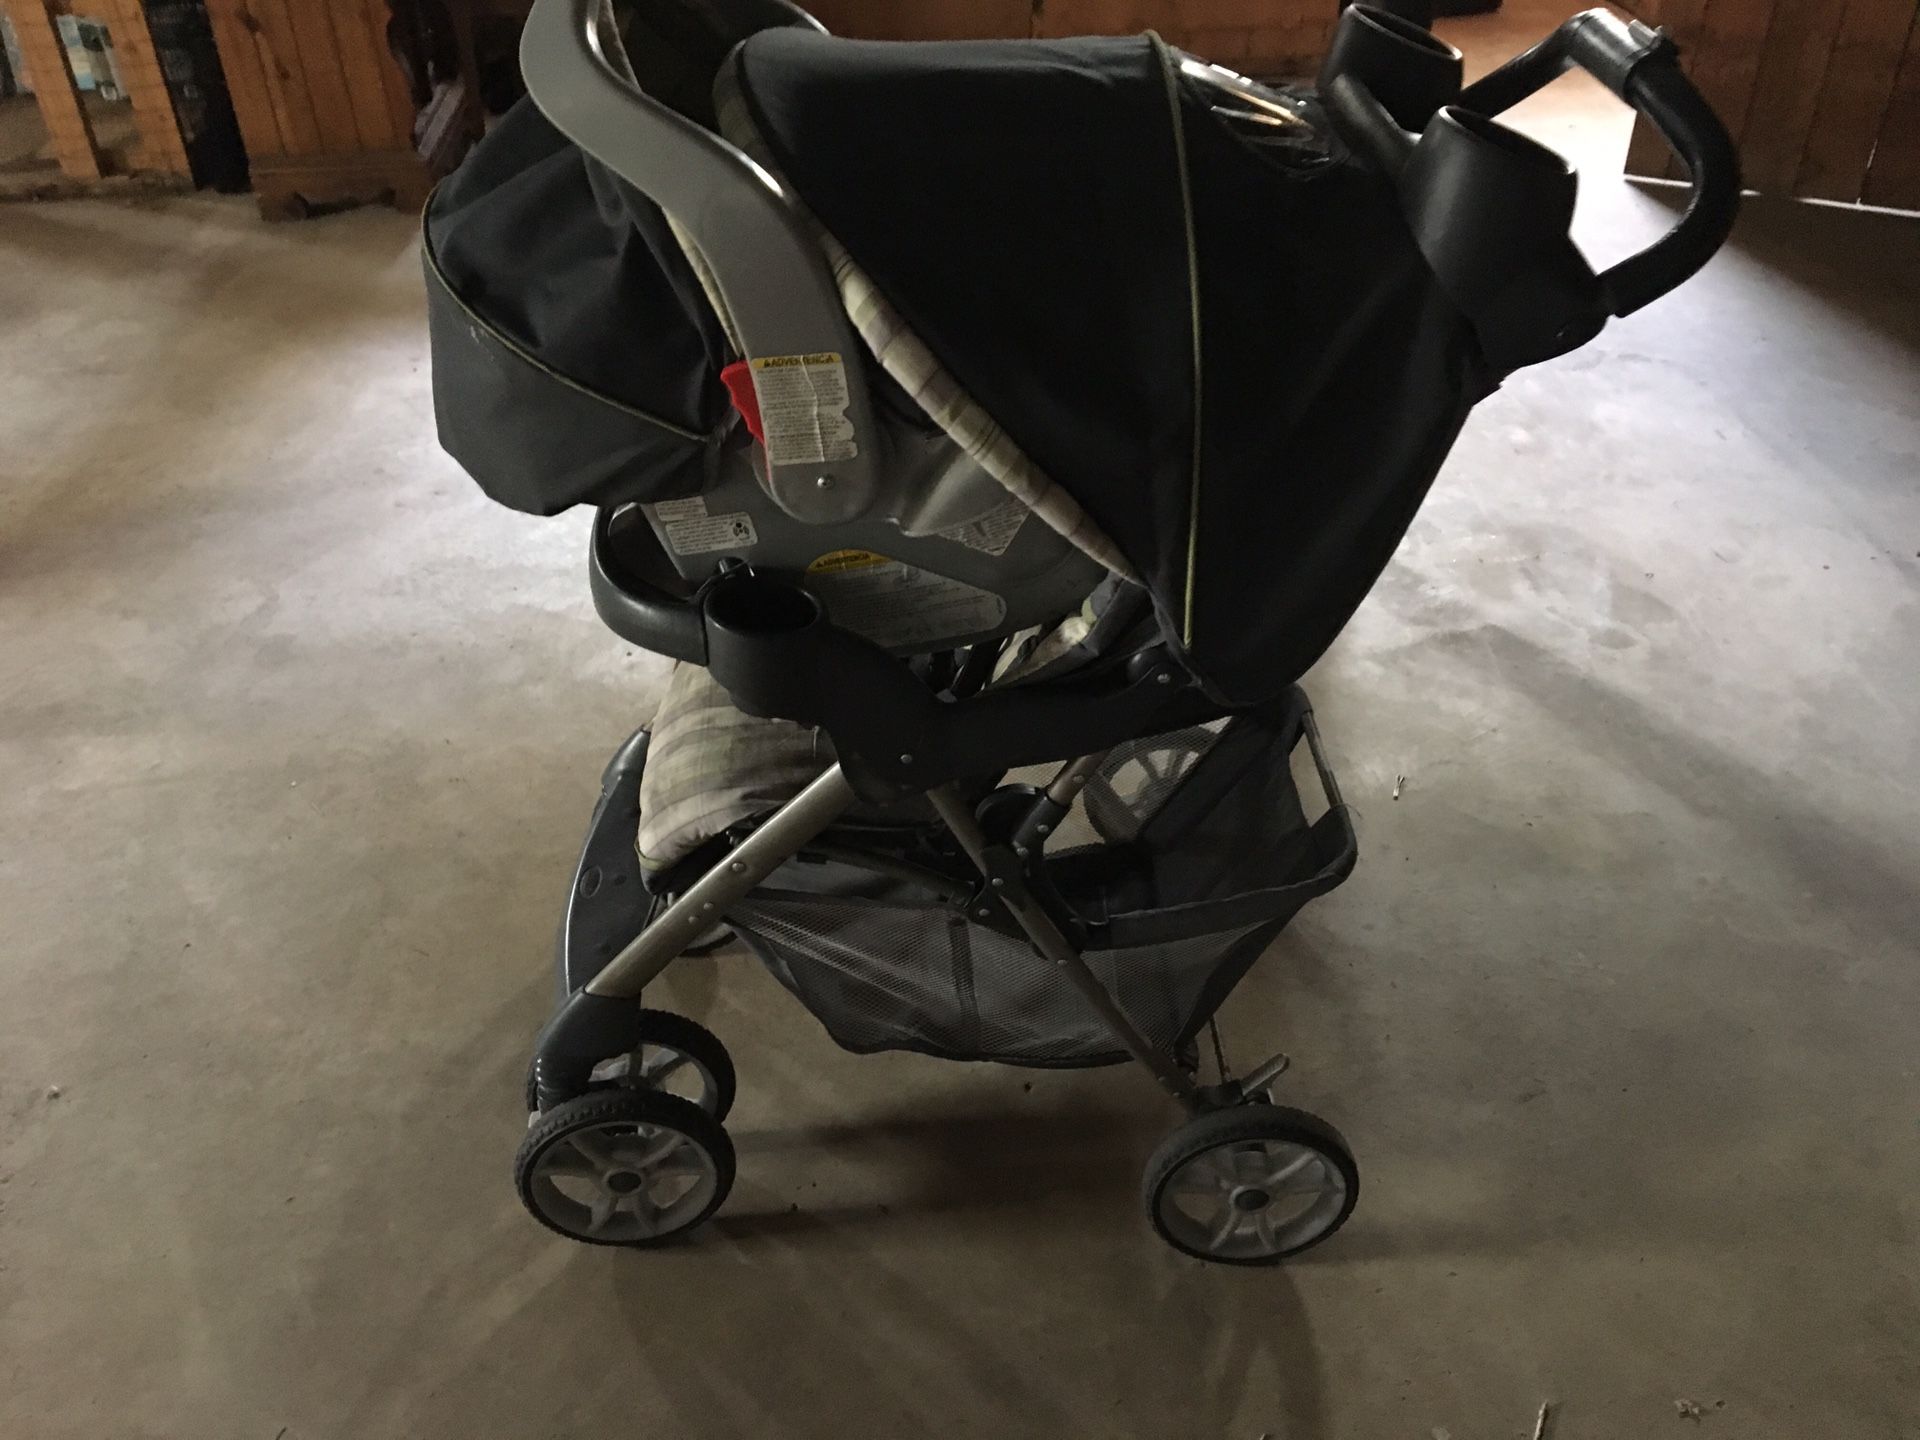 Baby stroller with car seat that detach